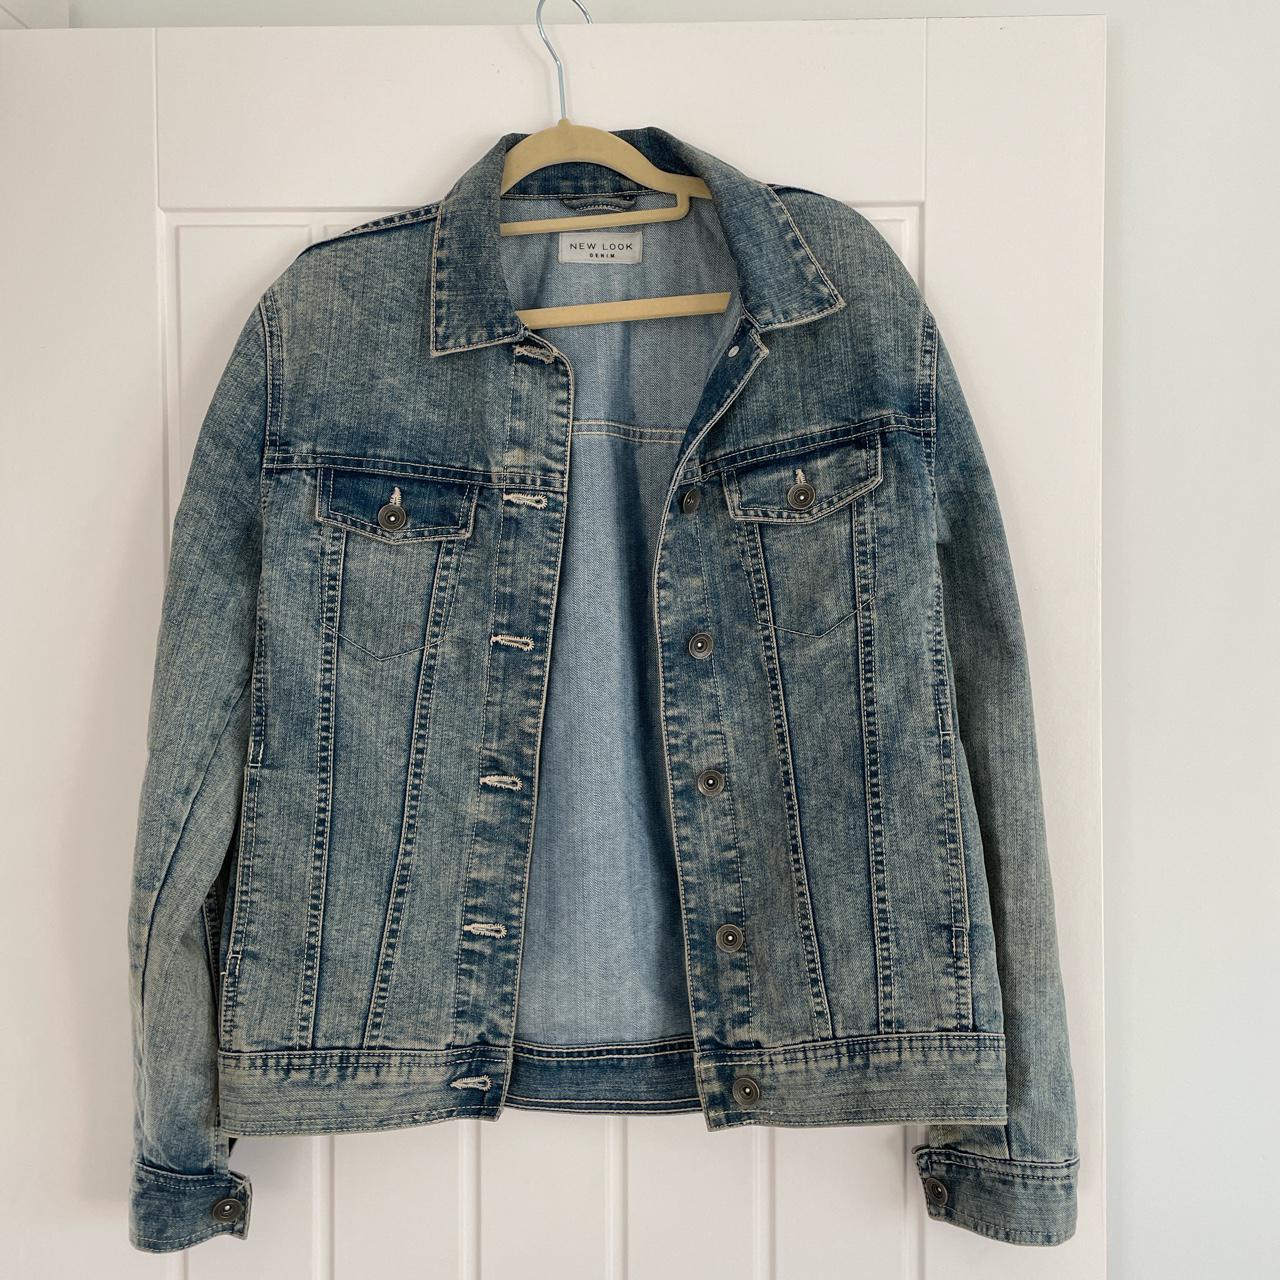 NEW LOOK denim jacket. Size 8 Great condition, only... - Depop